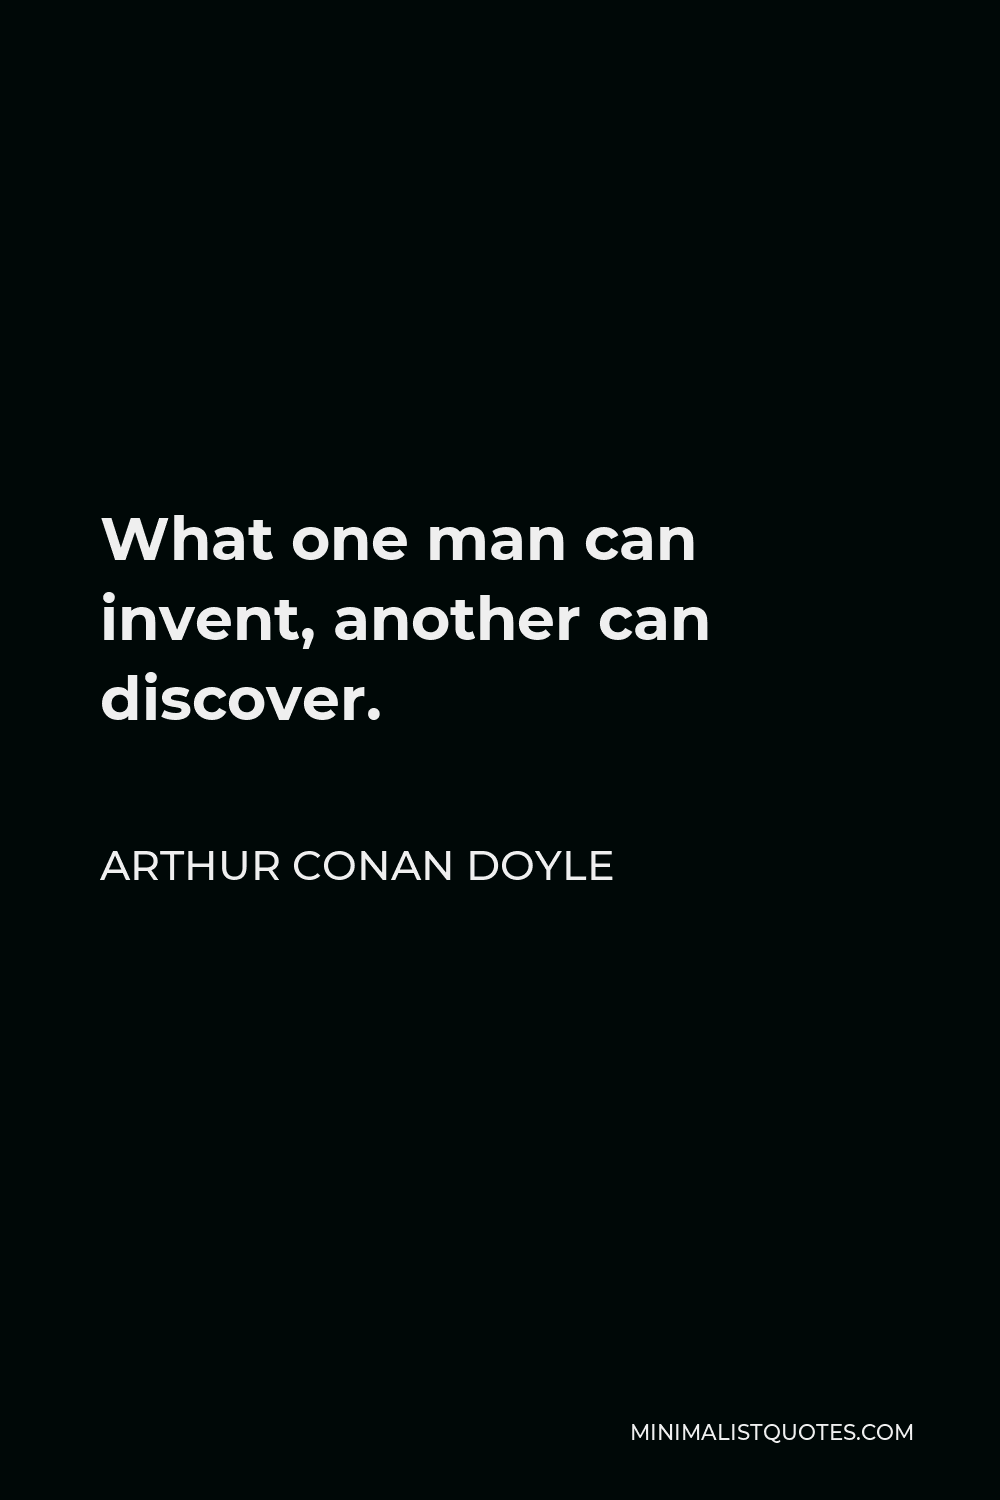 Arthur Conan Doyle Quote - What one man can invent, another can discover.